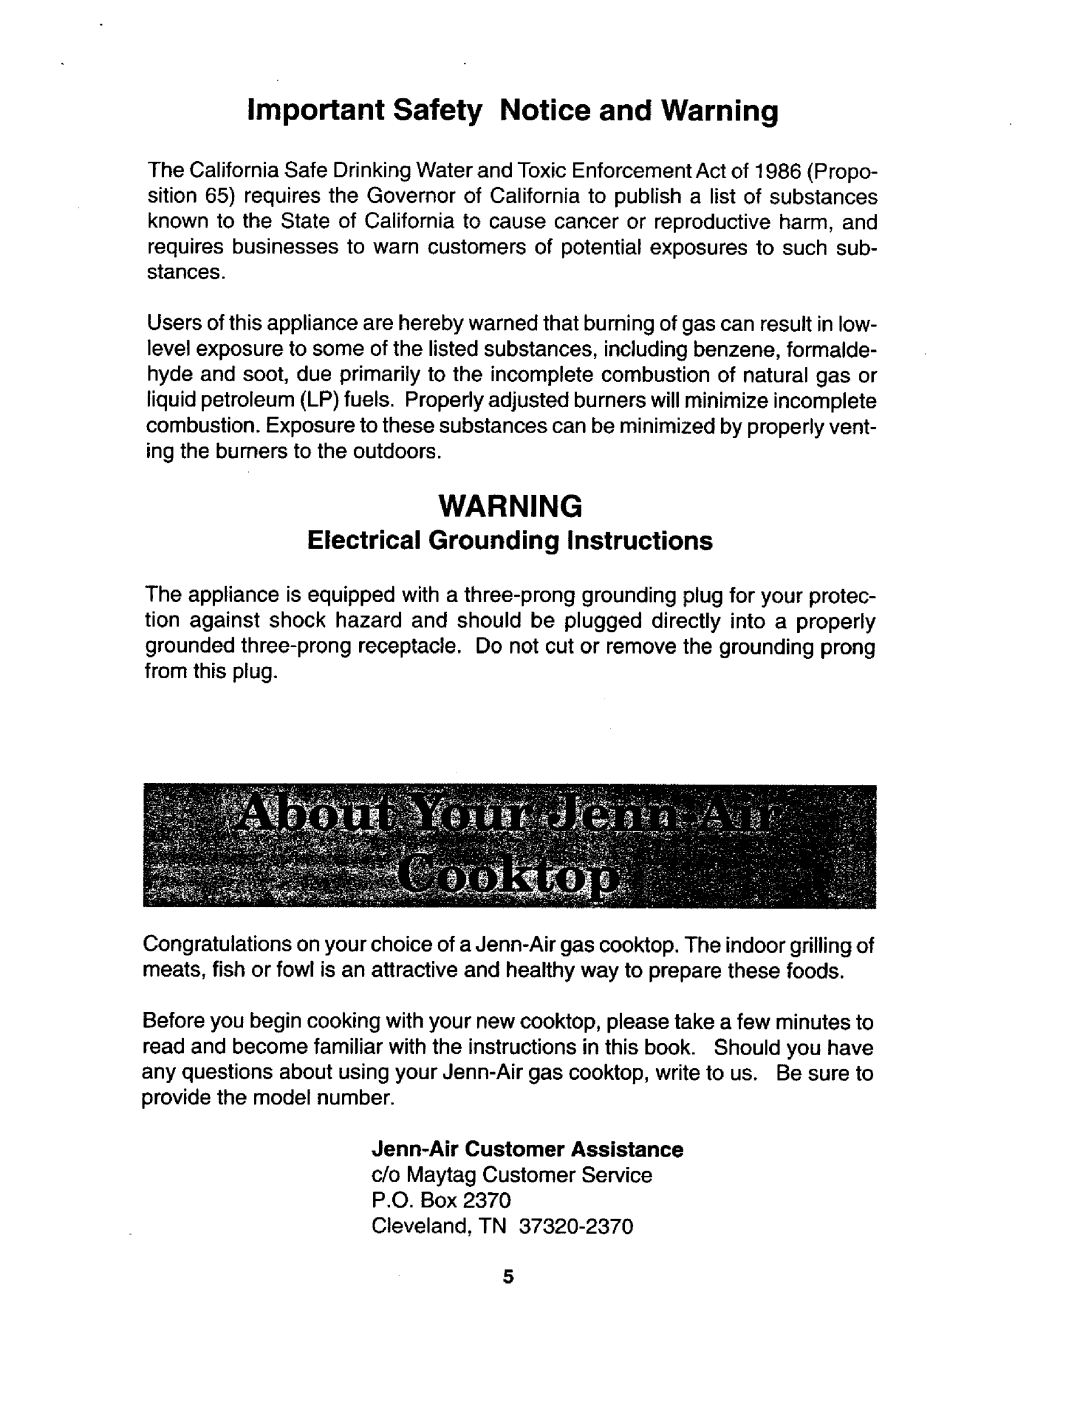 Jenn-Air JGD8348 manual Important Safety Notice and Warning, Electrical Grounding Instructions, Jenn-AirCustomer Assistance 